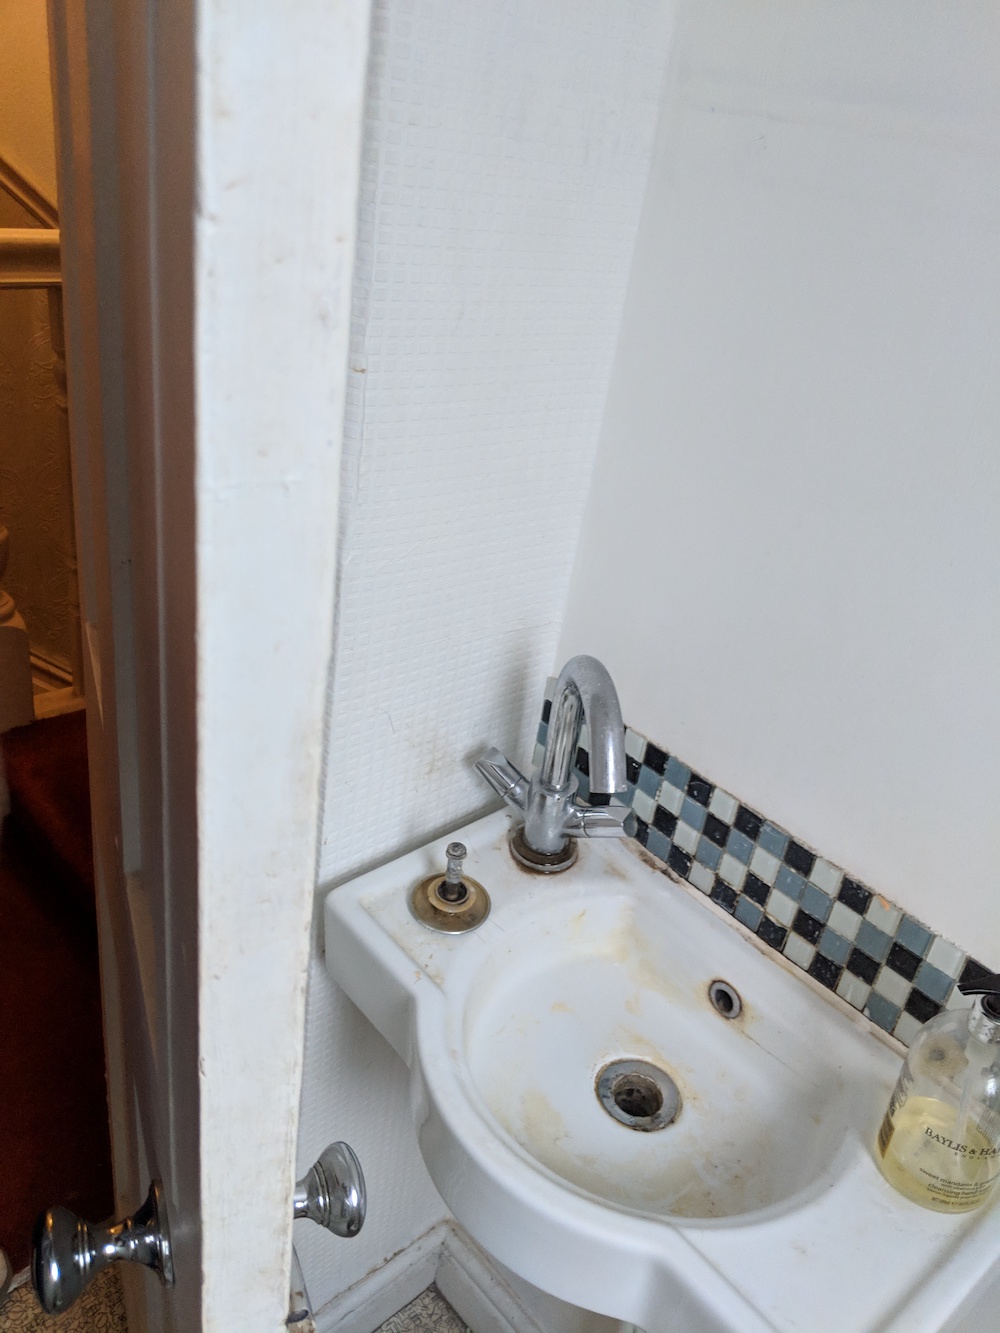 The tiny sink in the original toilet room